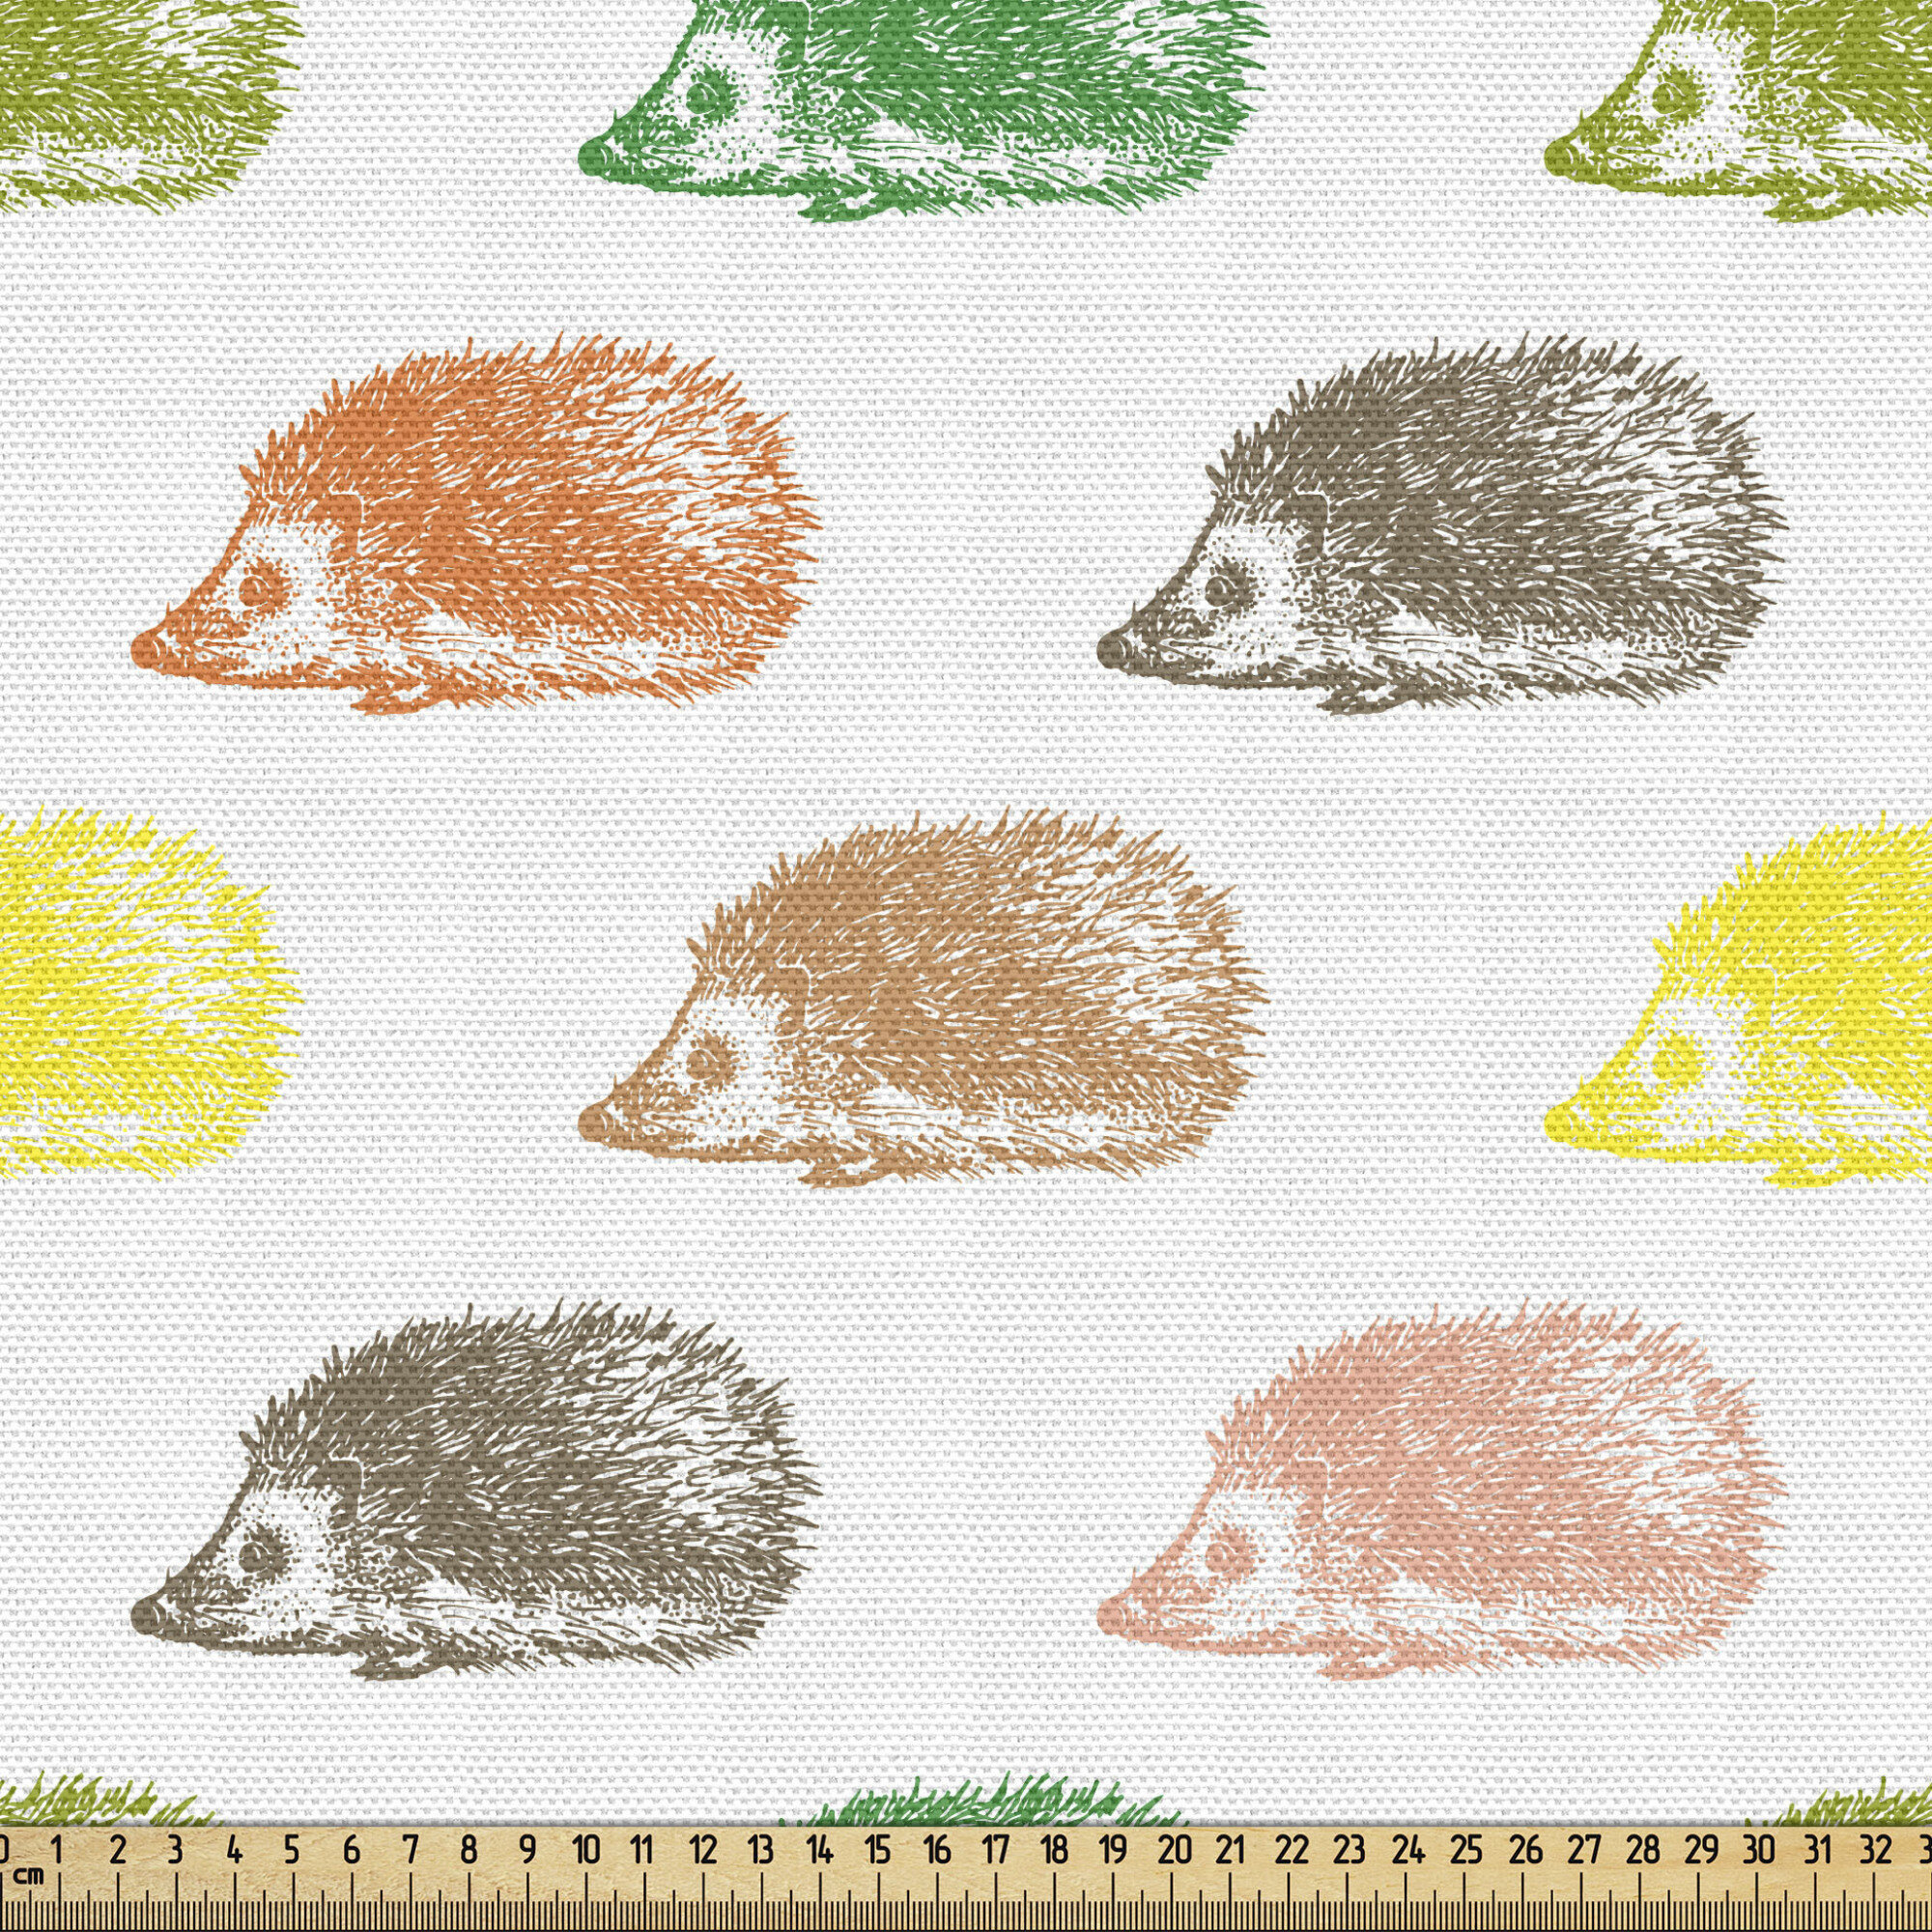 East Urban Home Ambesonne Hedgehog Fabric By The Yard, Print Of Pencil  Drawn Colourful Hedgehogs Arranged On A Plain Background, Decorative Fabric  For Upholstery And Home Accents,White And Multicolor - Wayfair Canada